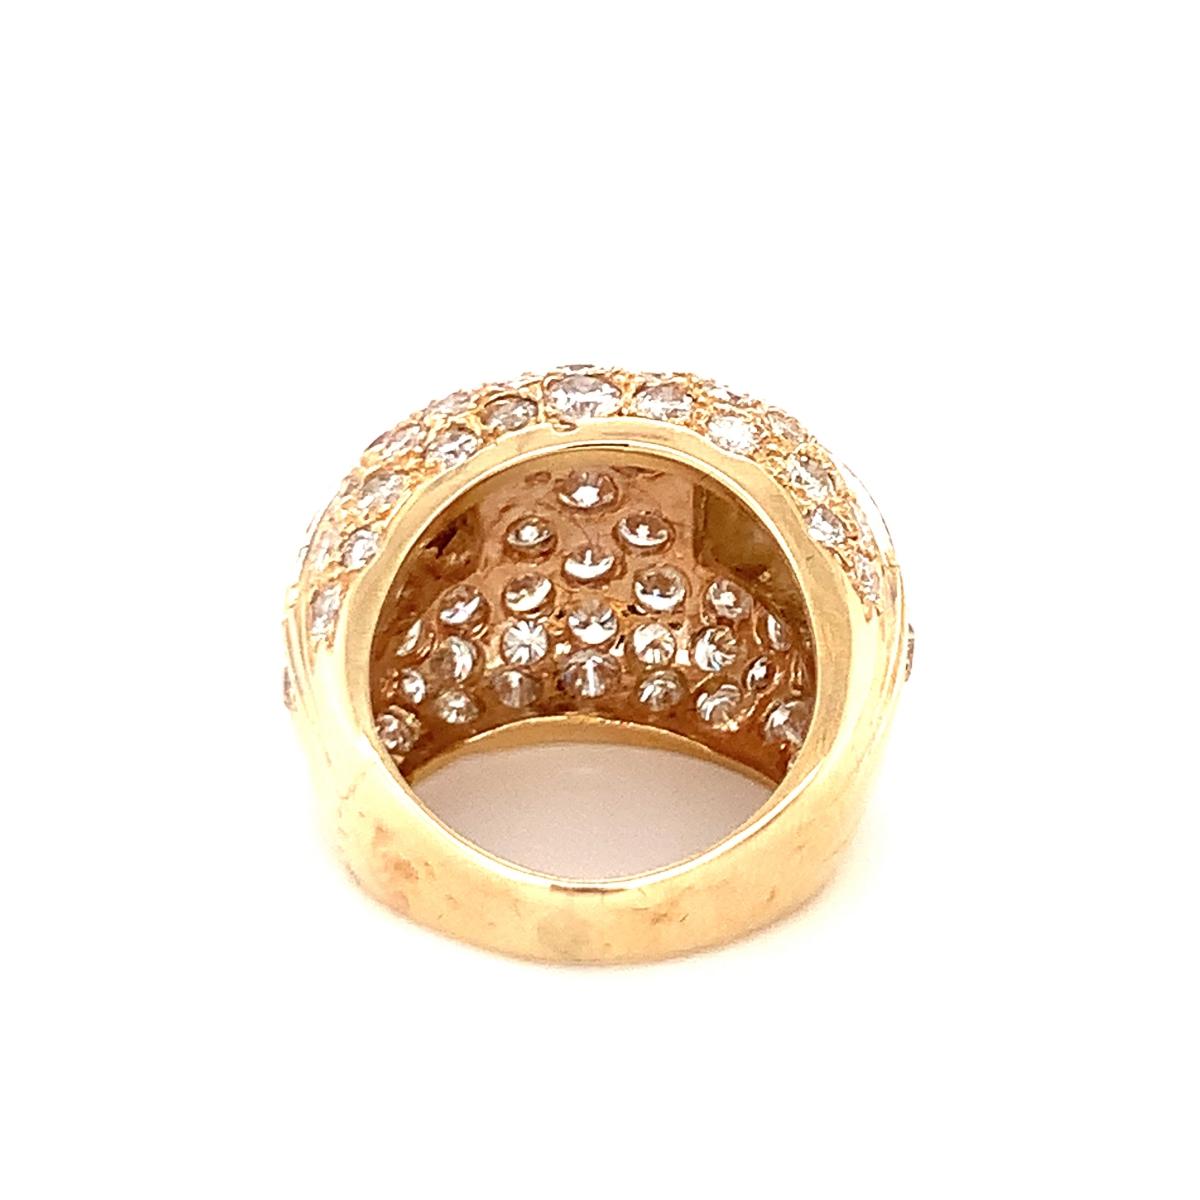 Pave Diamond Bombe 14K Yellow Gold Ring, circa 1970s For Sale 3